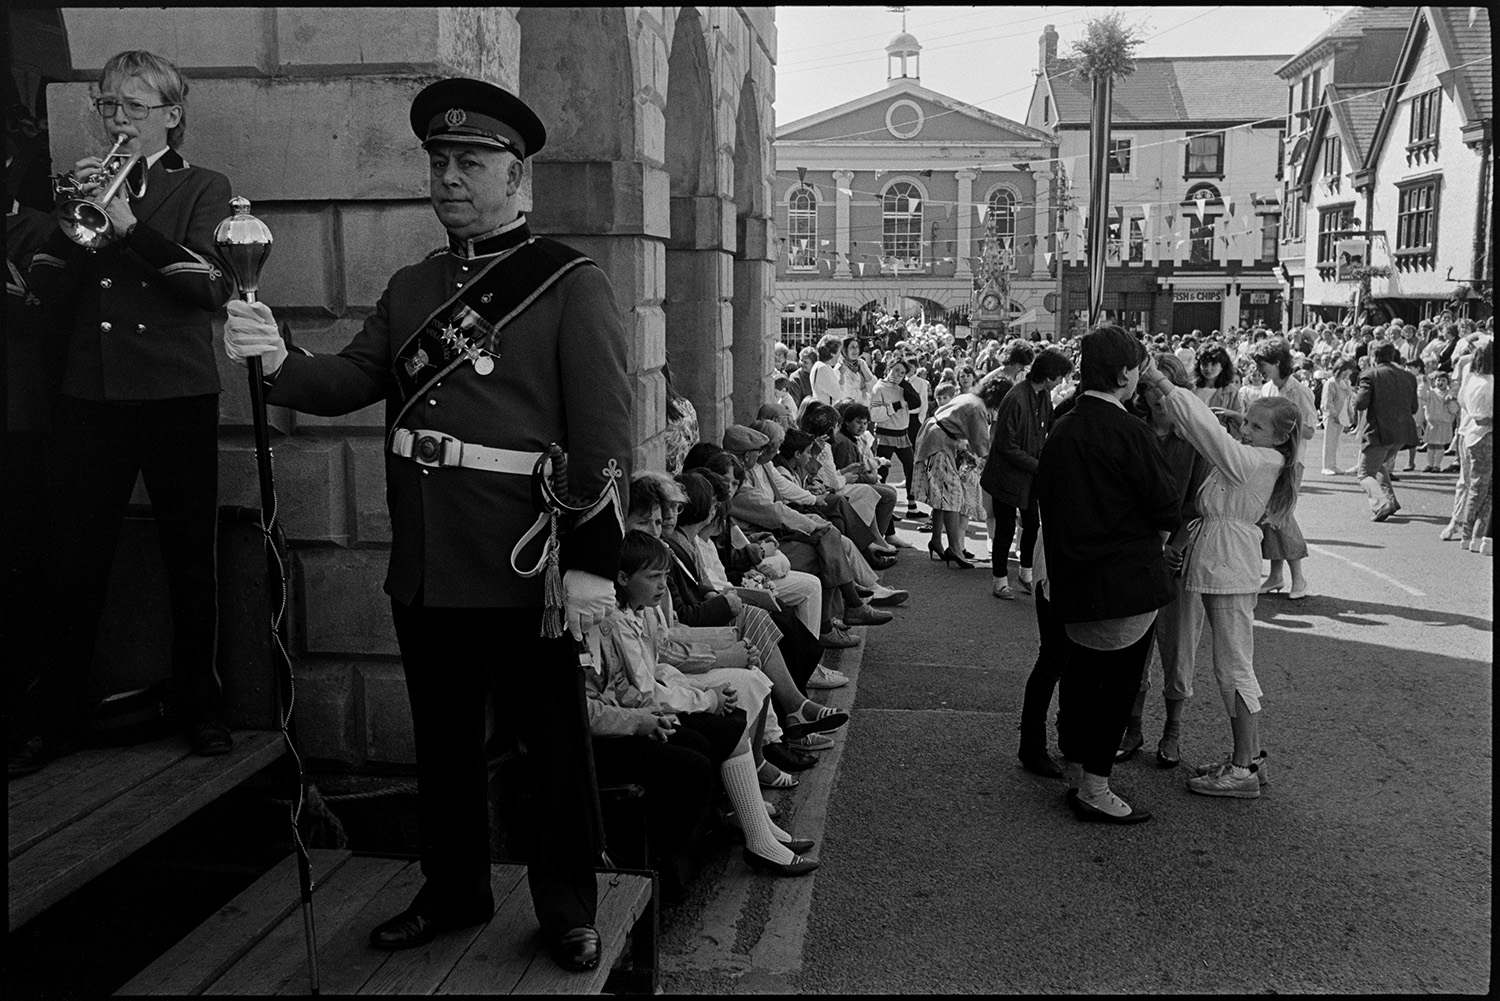 May Fair celebrations, band marching into square, children dancing. 
[People sat outside the Town Hall at Torrington May Fair, A man wearing a uniform and holding a large mace or baton is stood next to a bandsman playing a cornet. Men, women and children are dancing in the street in the background, which is decorated with bunting.]